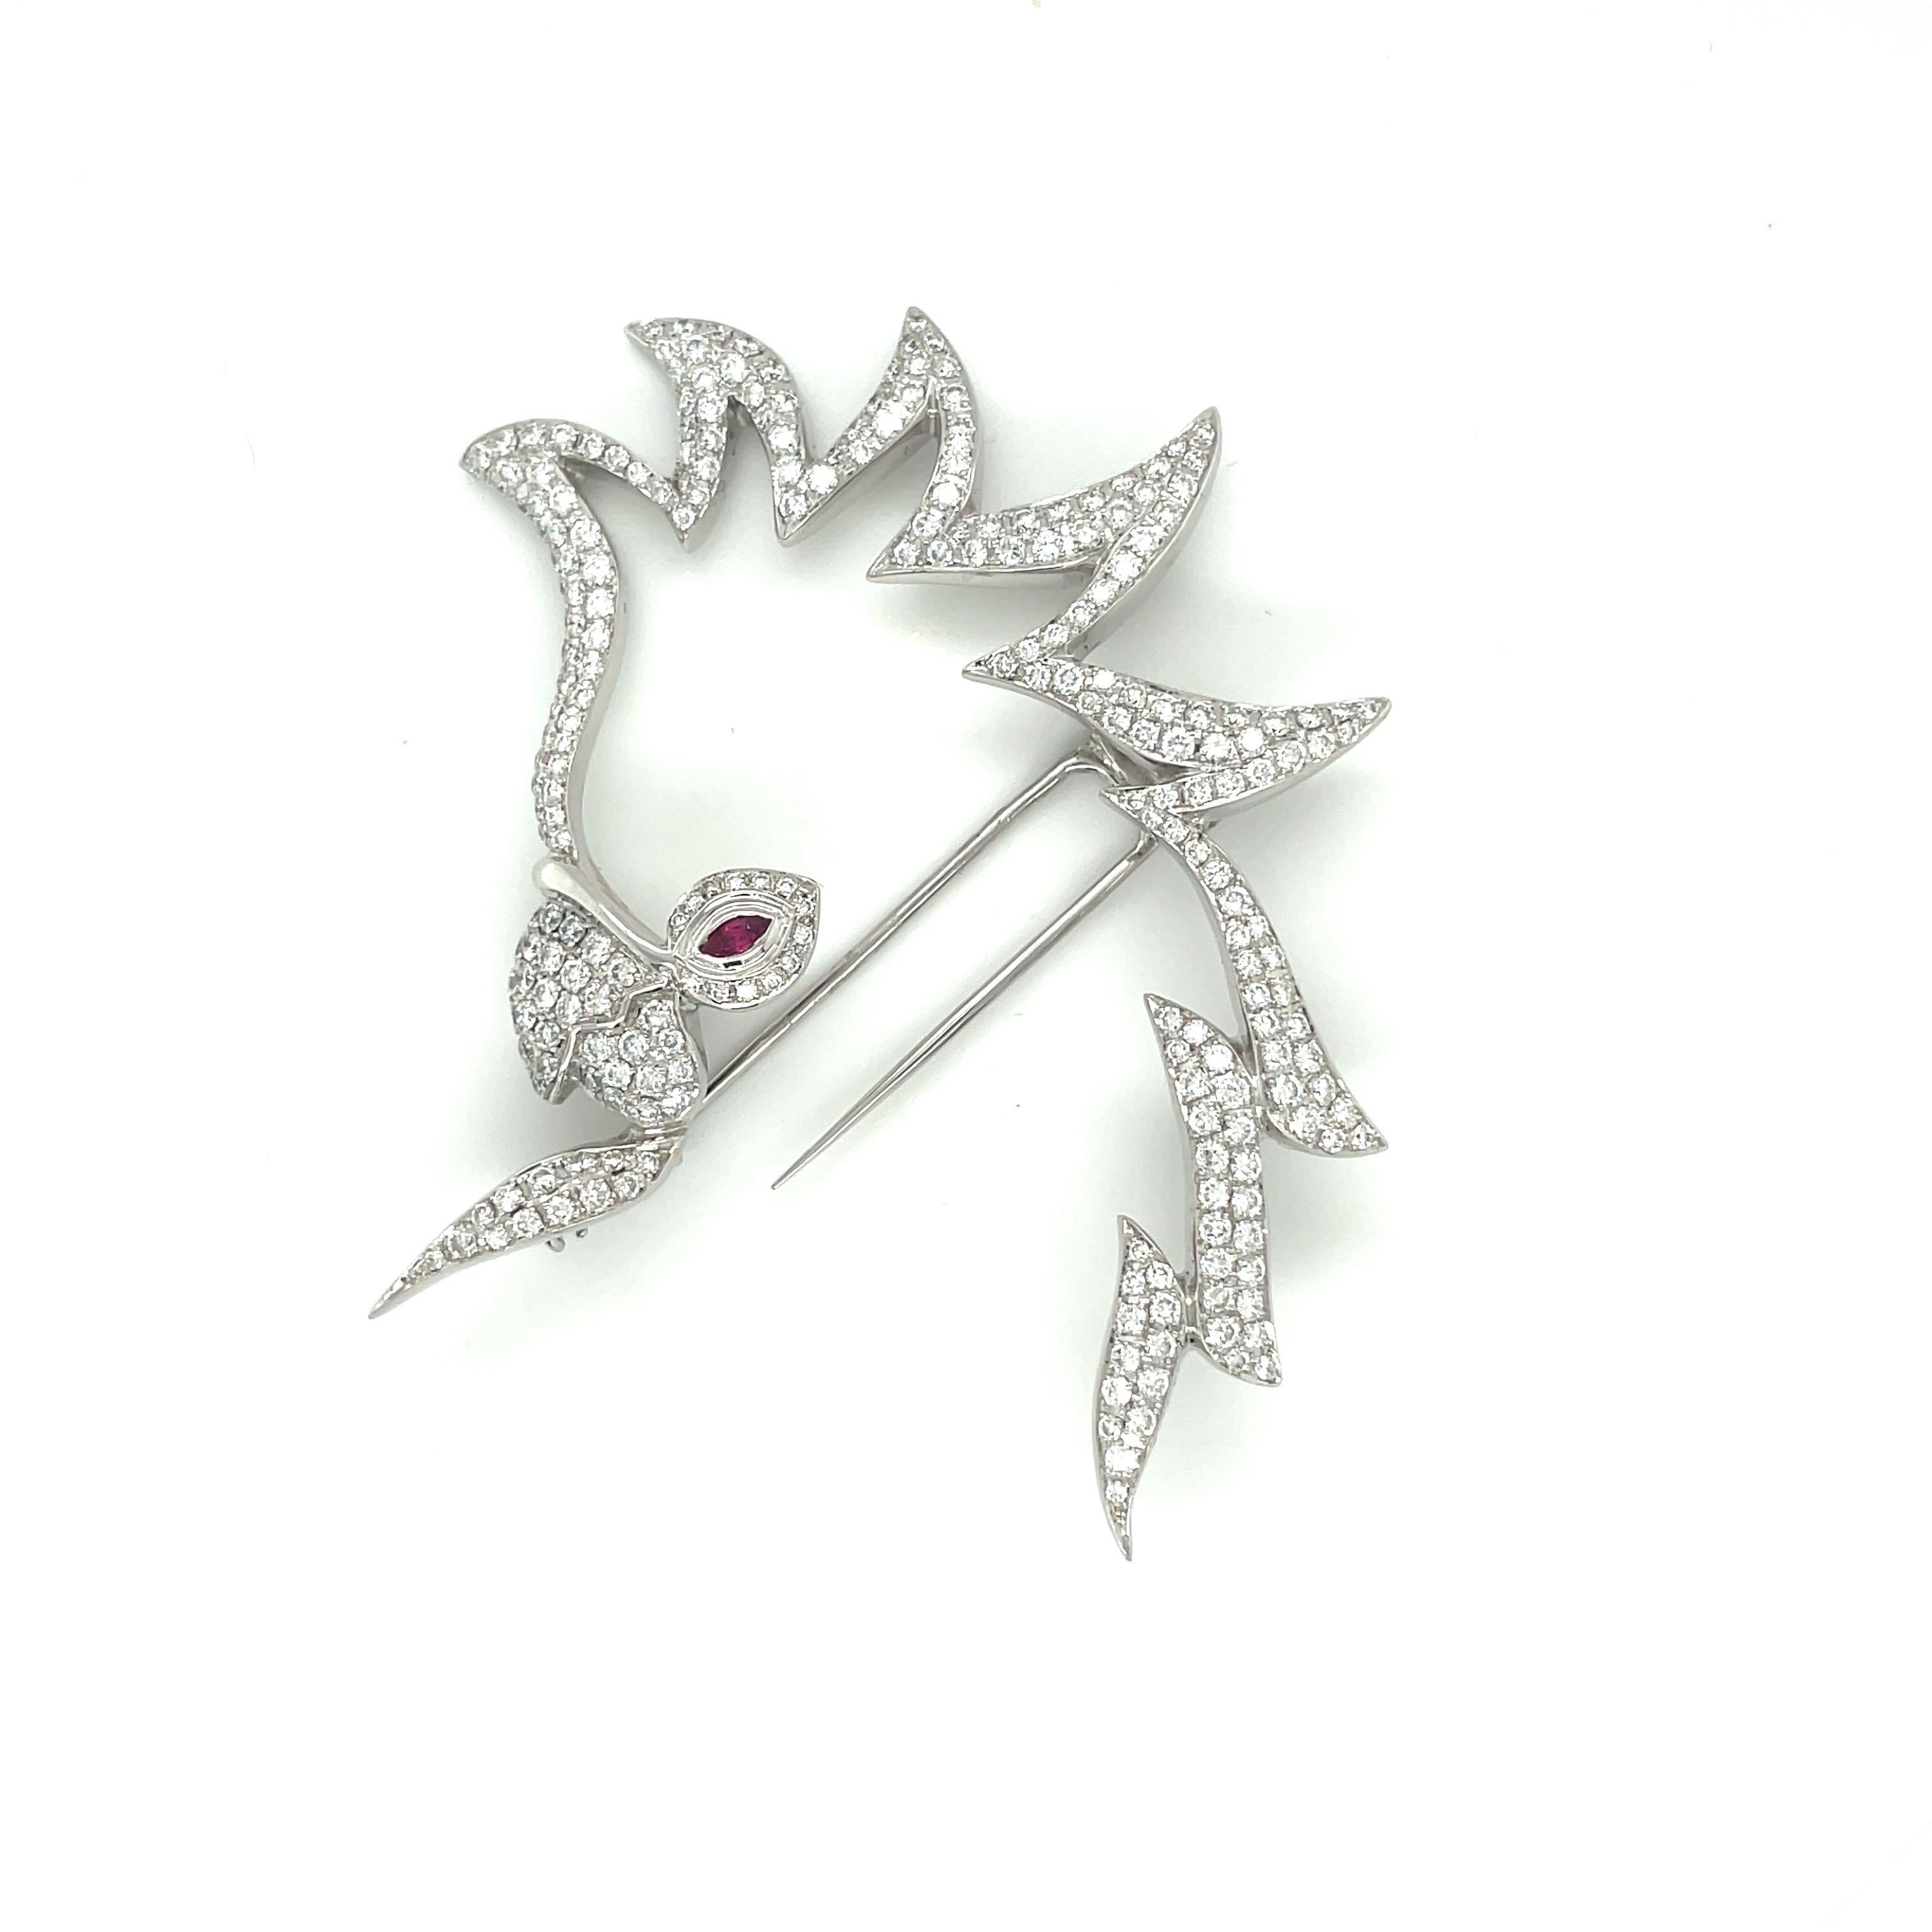 A graceful cockatoo silhouette in 18 karat white gold set with round brilliant diamonds. The  cockatoo's eye is a marquise shaped ruby. The open worked brooch measures 2.75